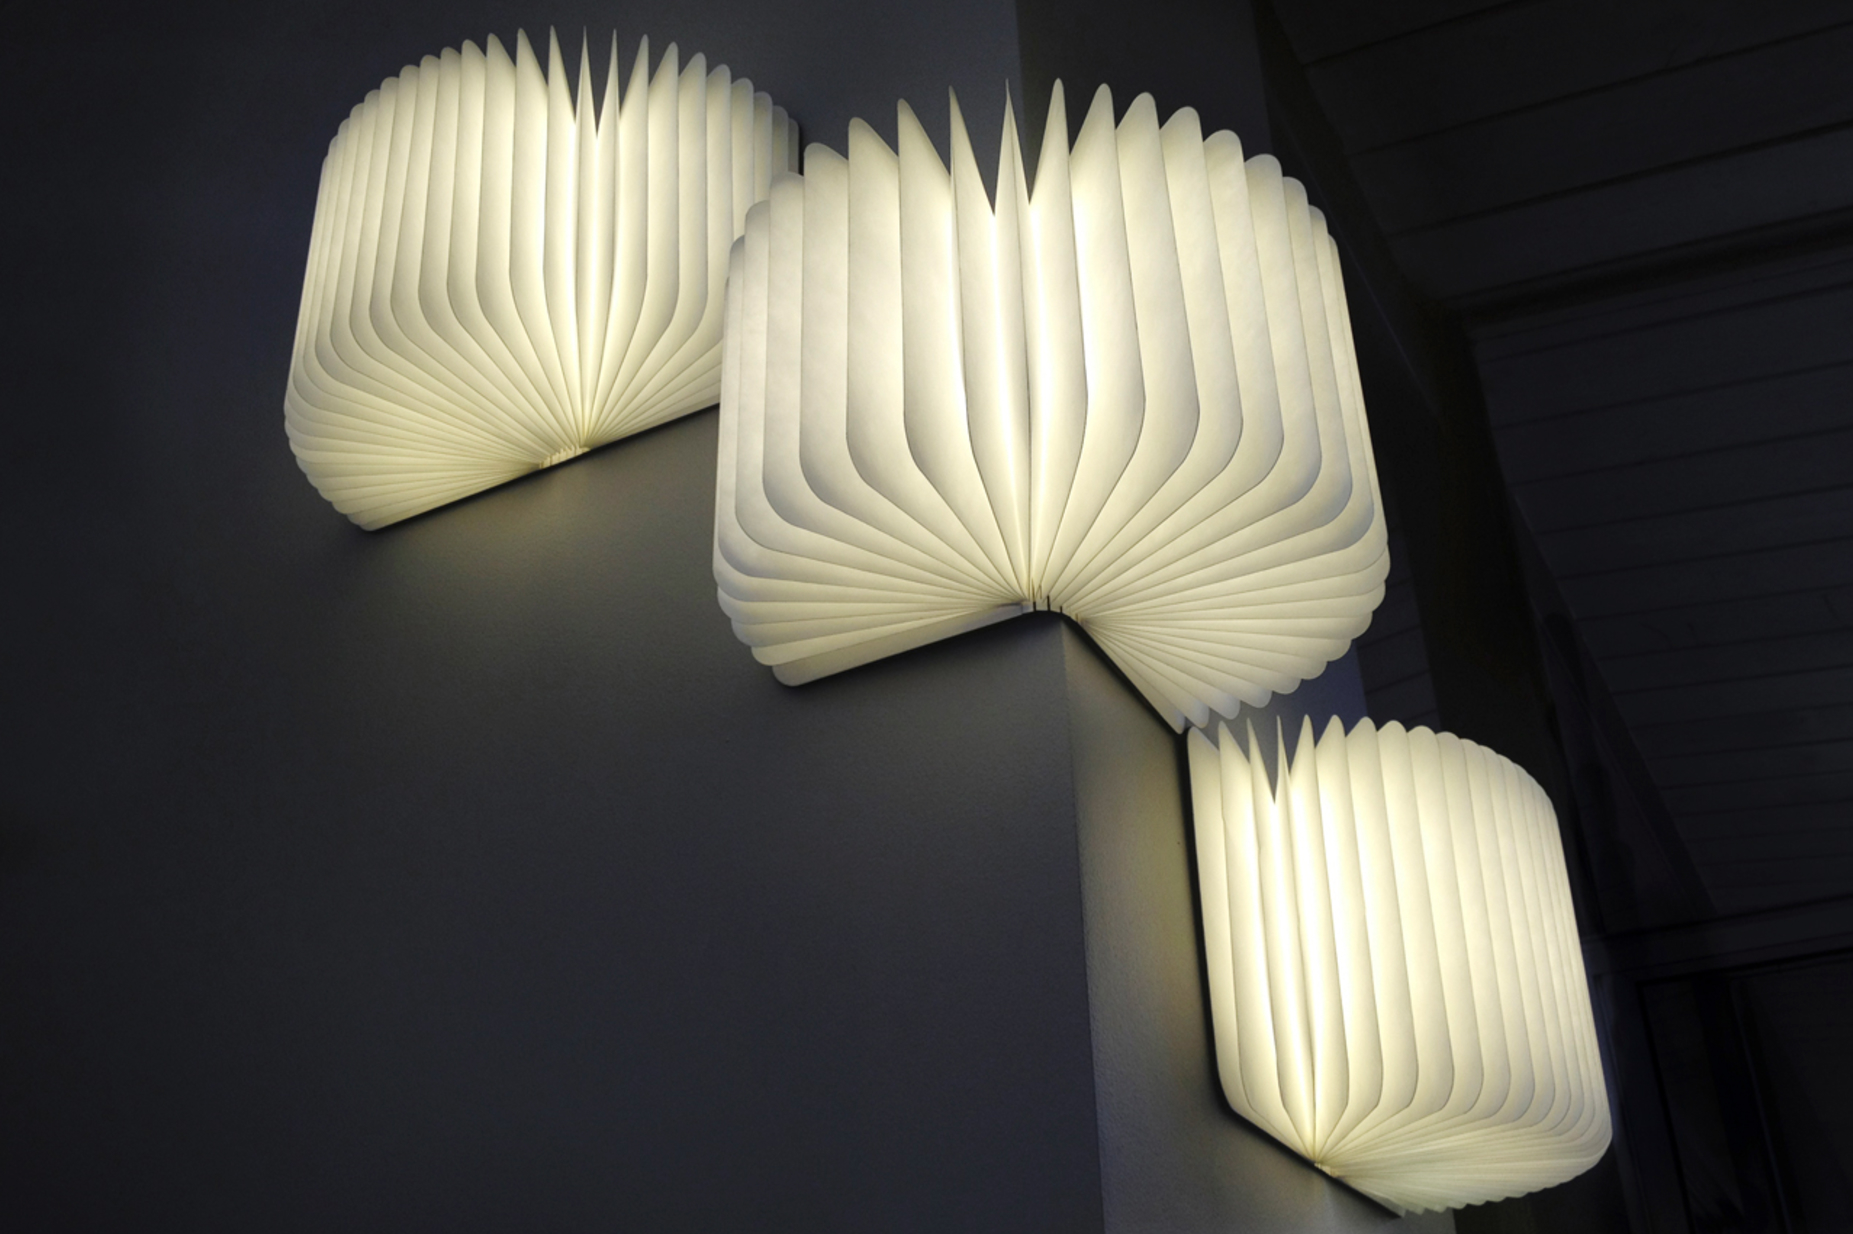 photos of amazing lamps and lights lumio lamp